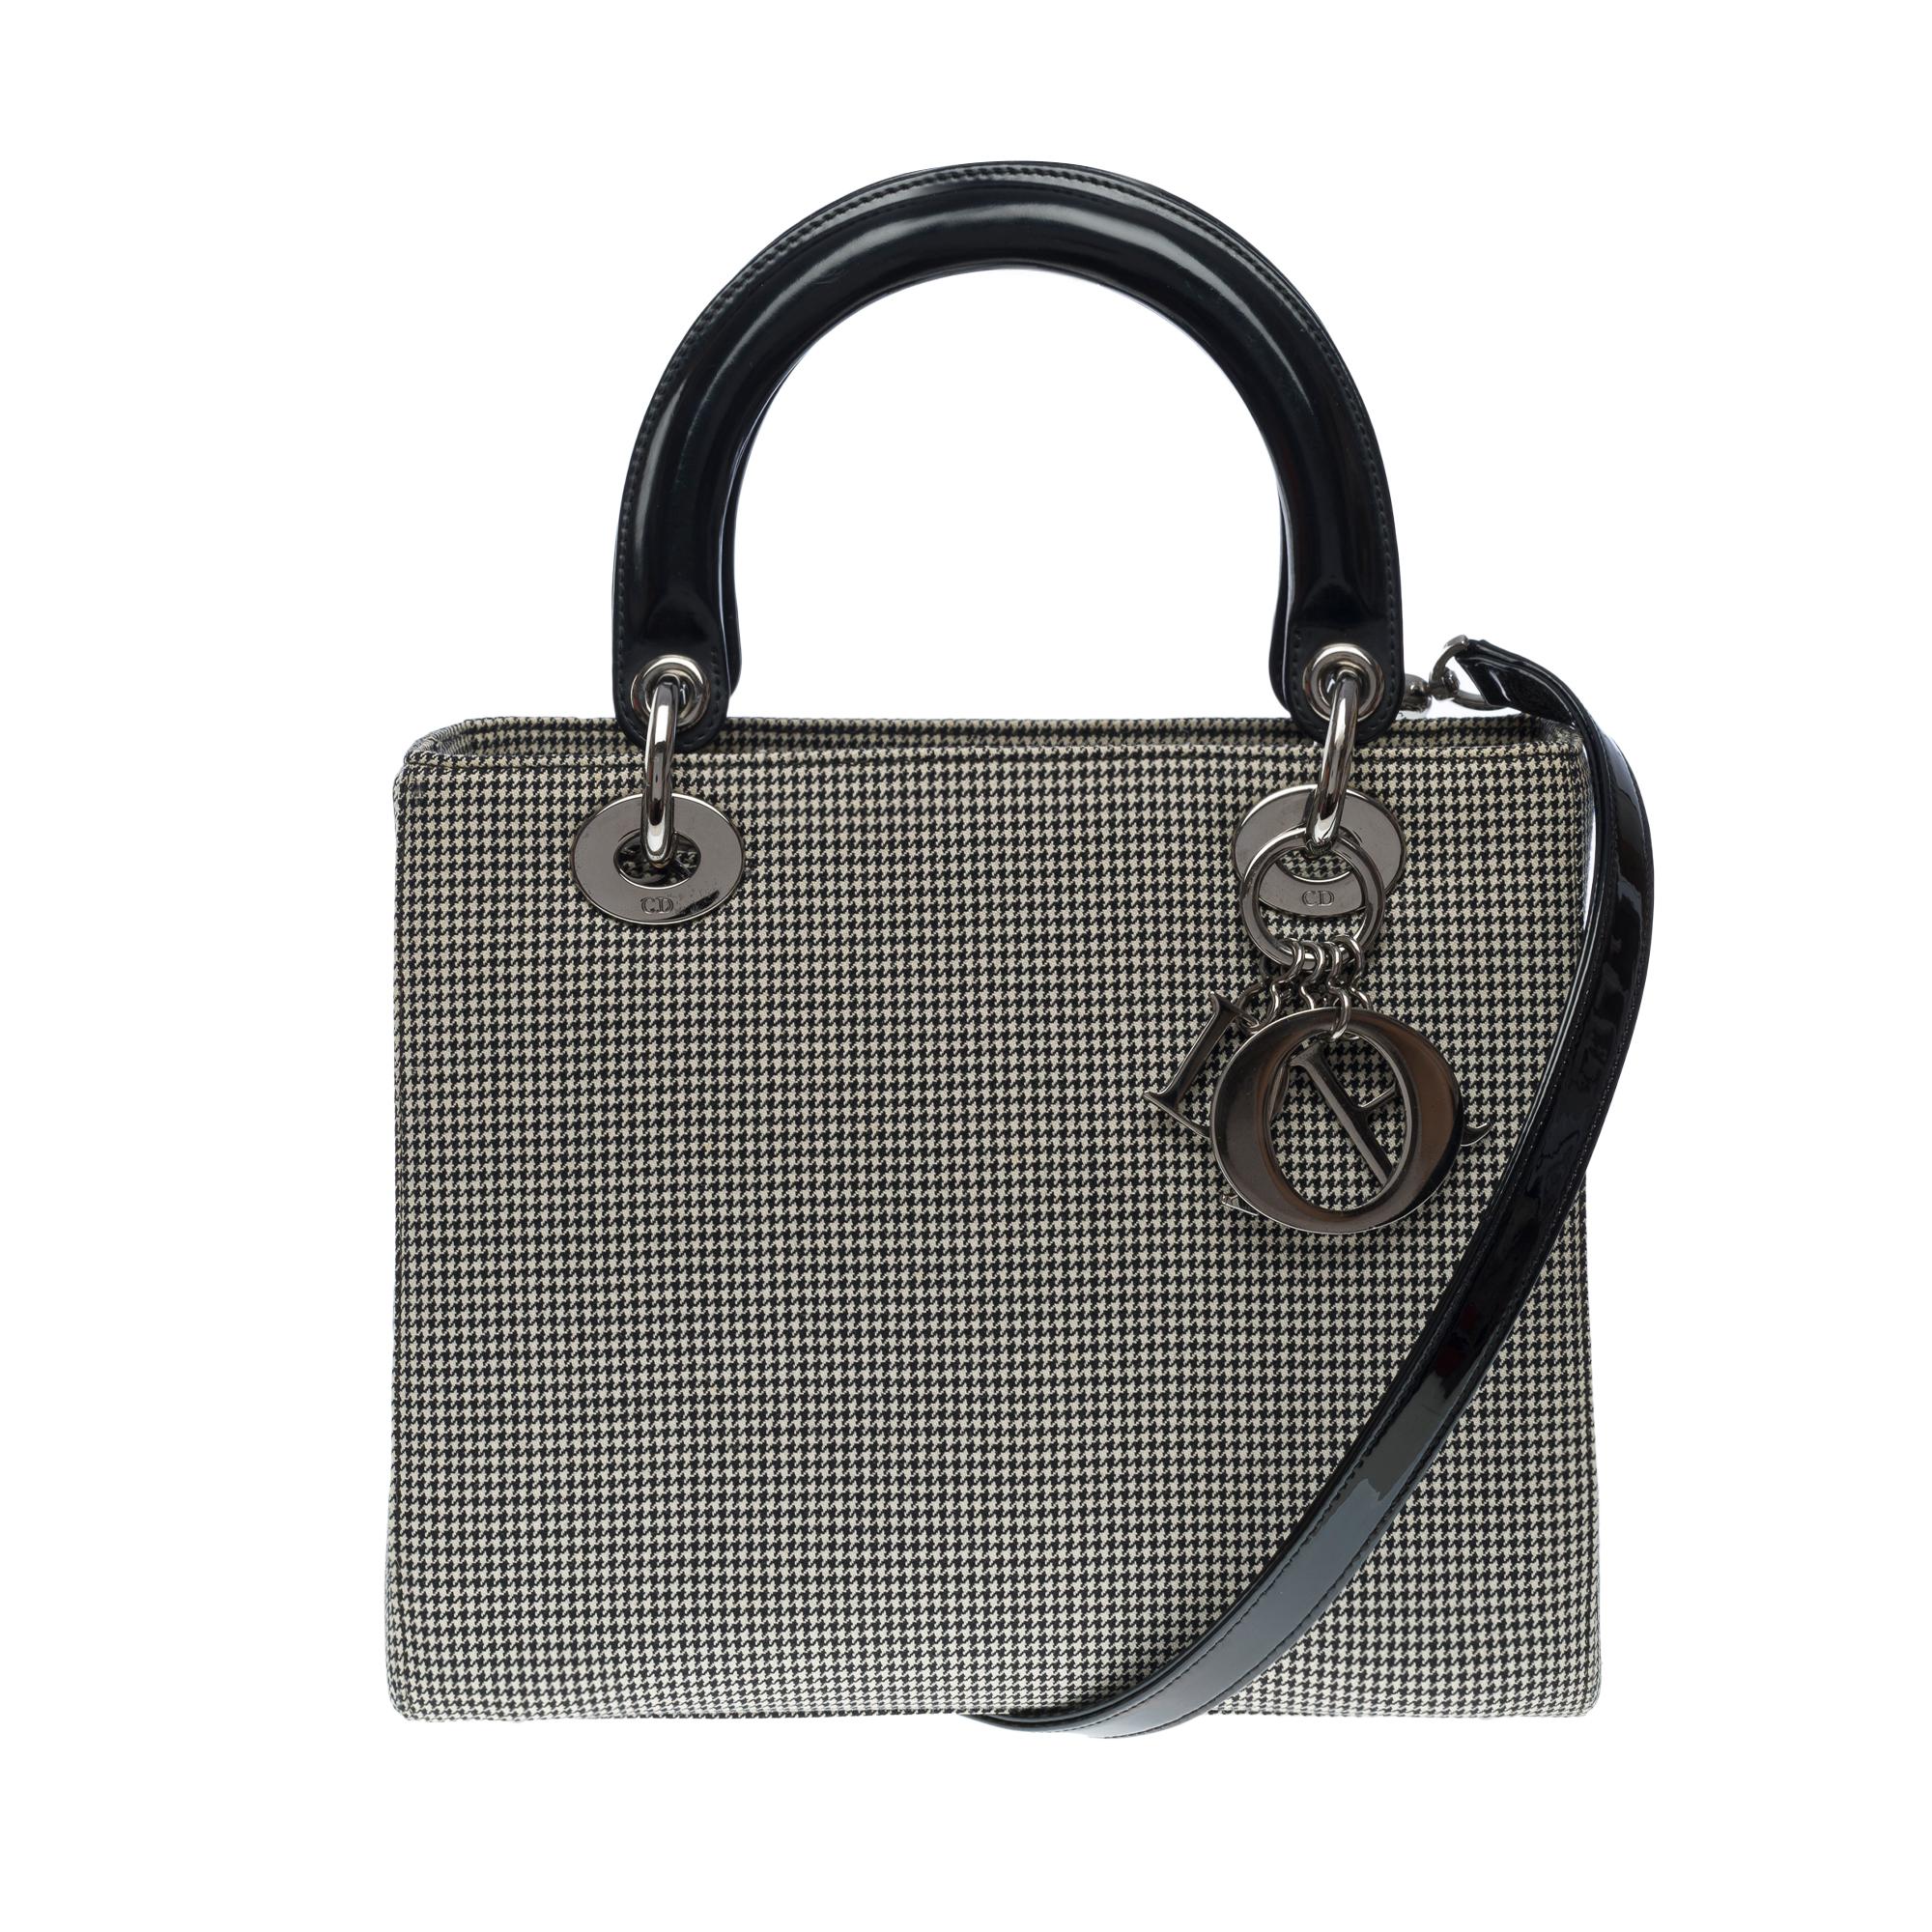 Very chic Lady Dior MM handbag strap in pied-de poule canvas, blackened silver metal hardware, double handle in black patent leather, removable shoulder strap in black patent leather allowing a hand or shoulder or crossbody carry

A zipper
Black